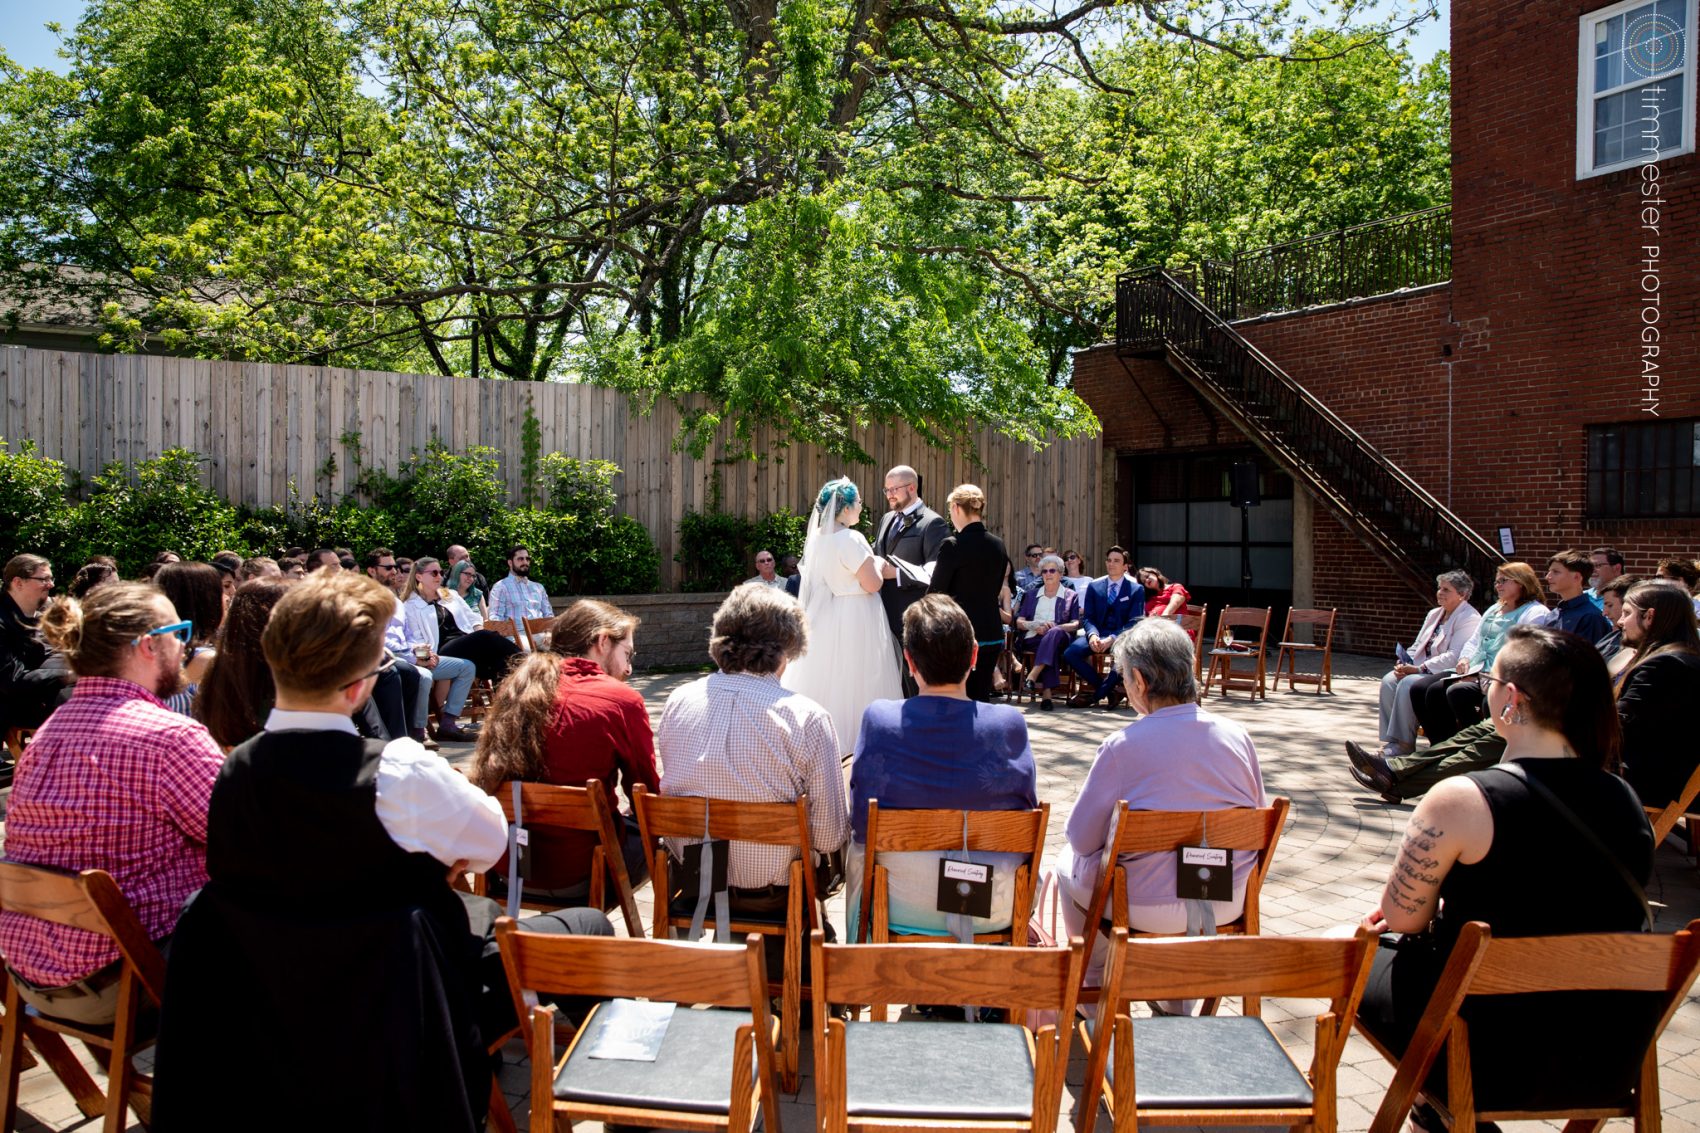 A circle wedding ceremony outdoors at The Cookery in Durham, NC.